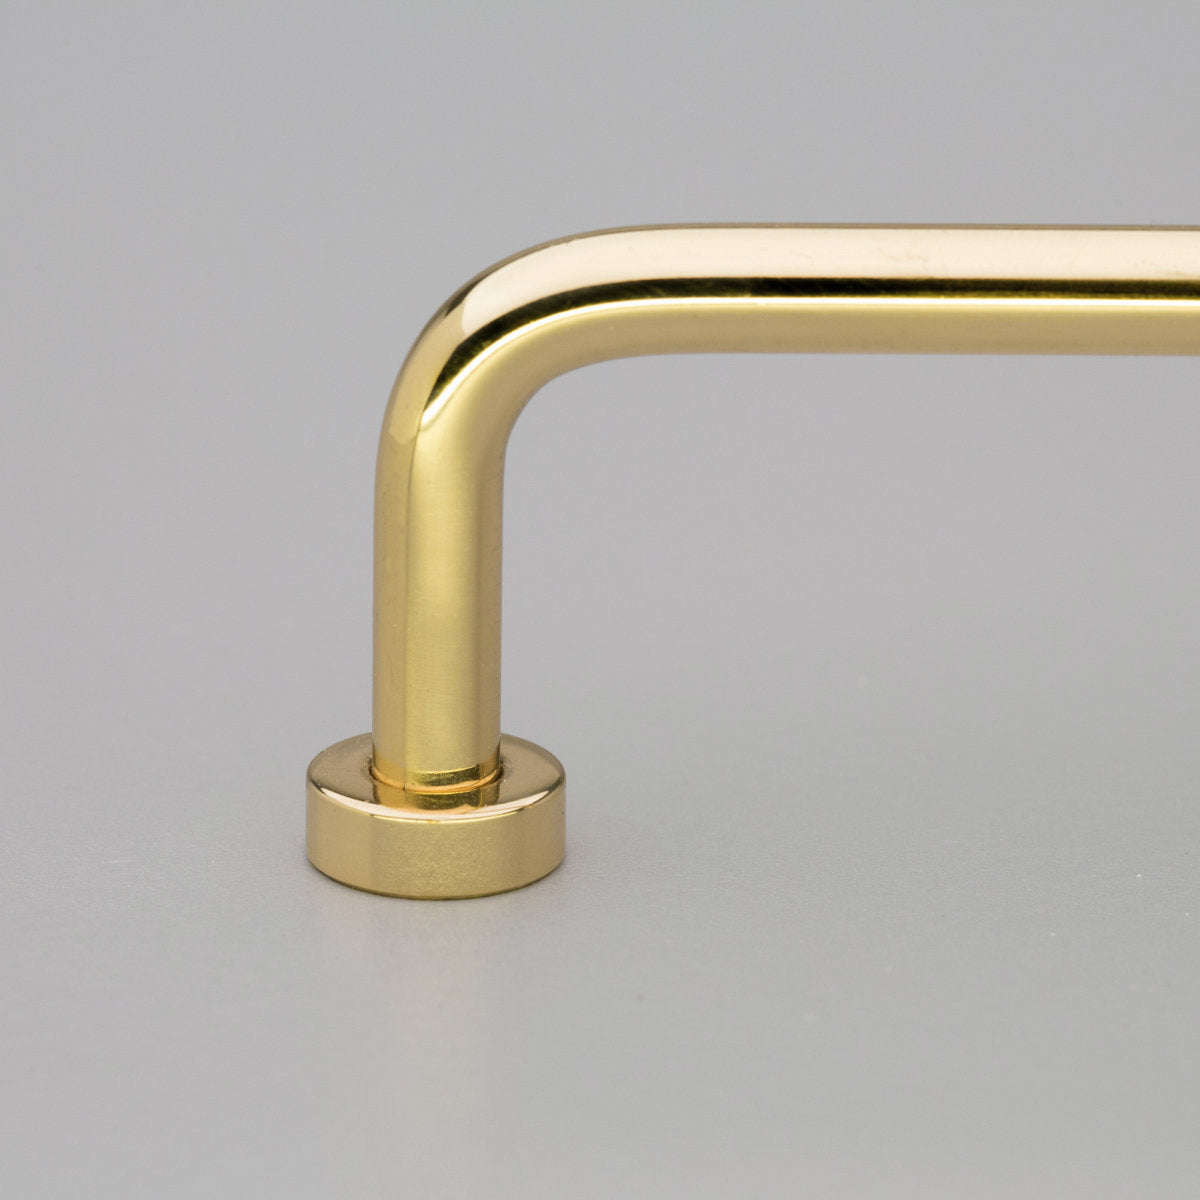 L795 Lounge Handle by Kethy